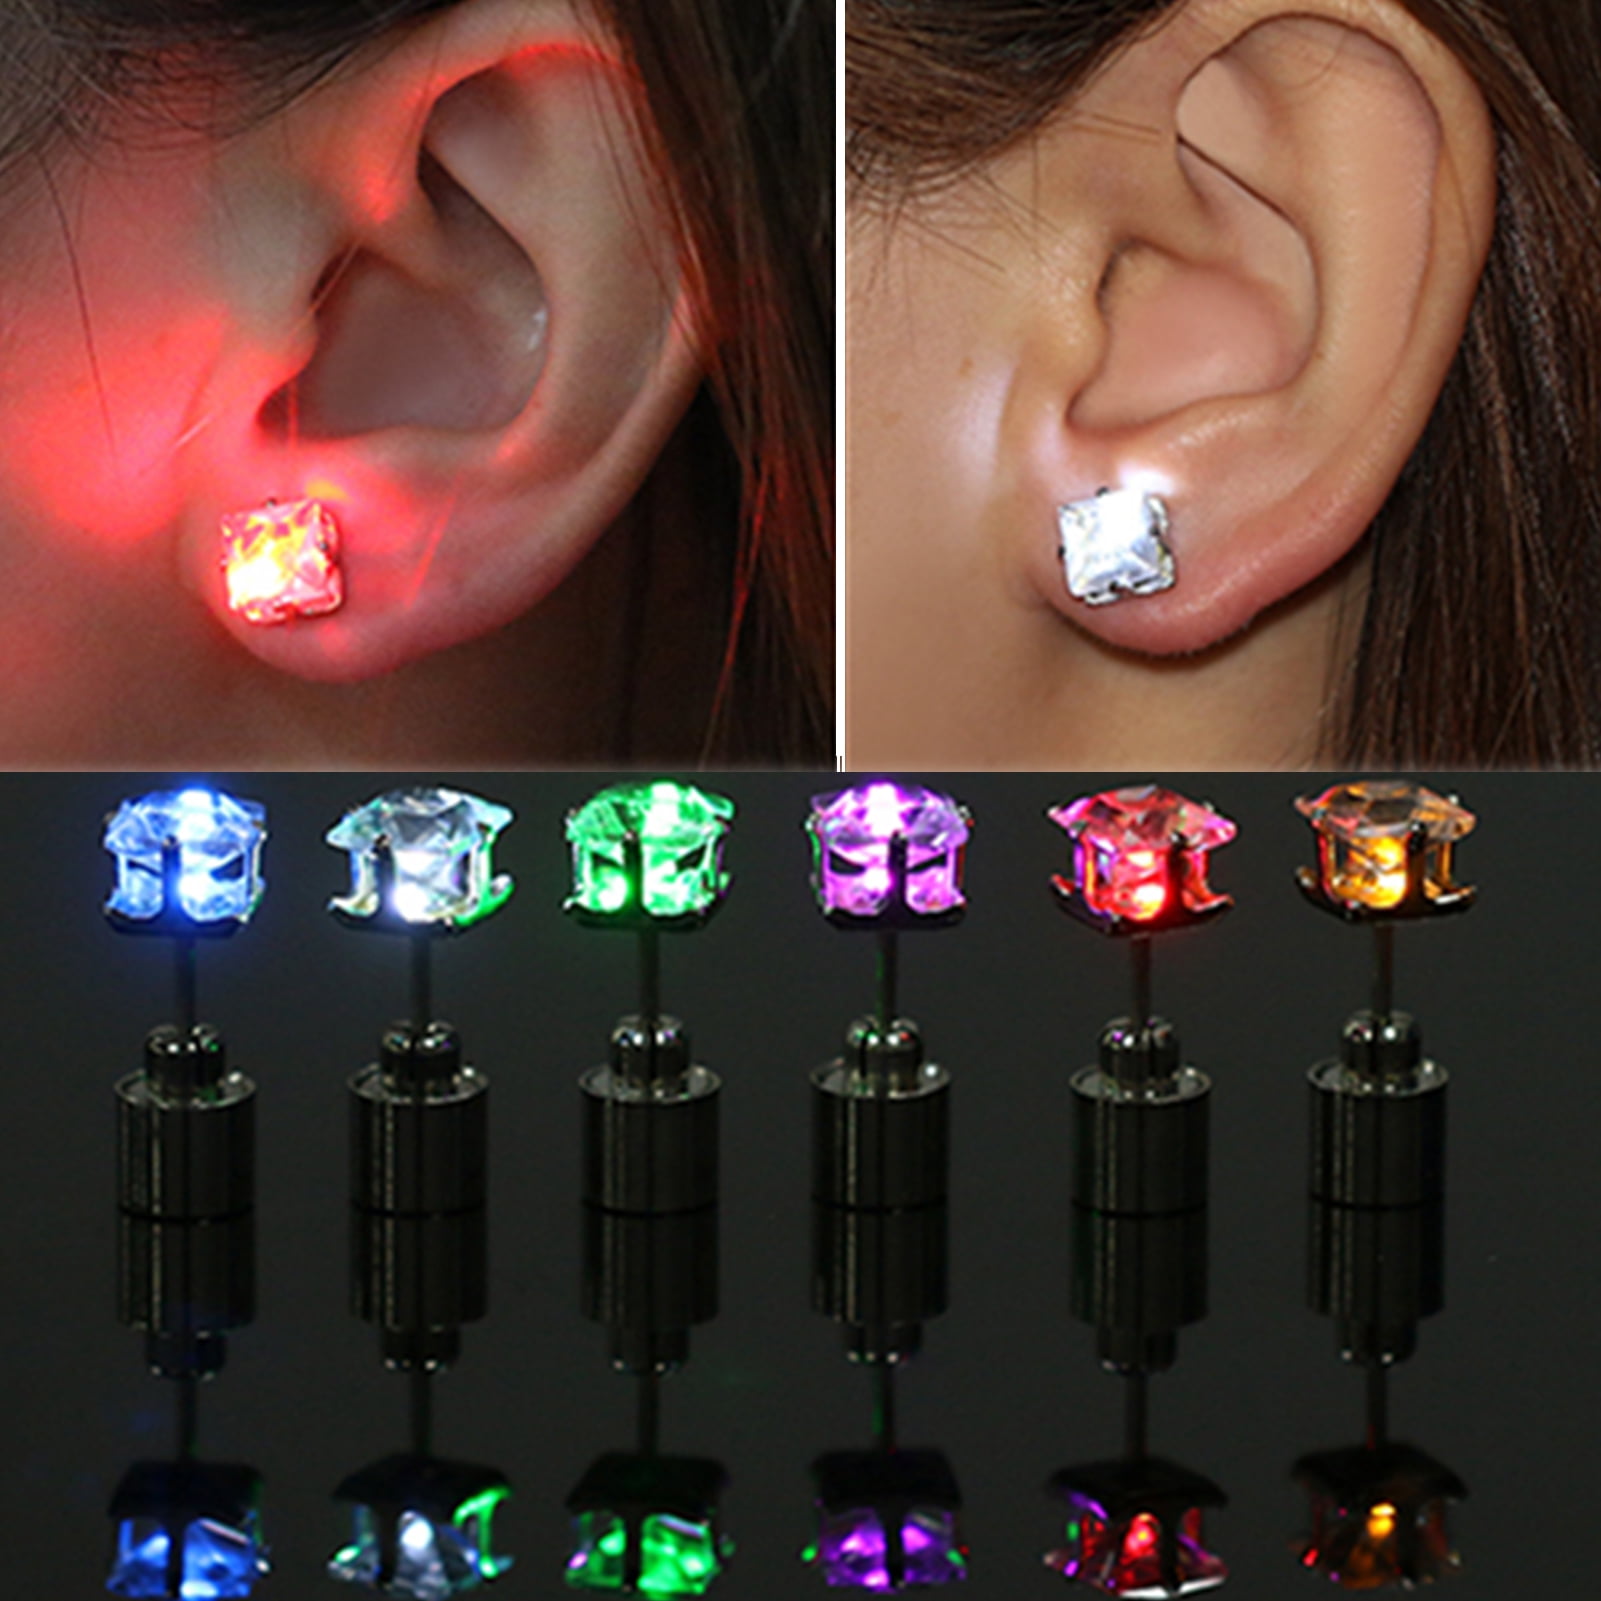 US SELLER 1 Pair LED Light Earrings Fashion Studs Dance Party Jewelry Accessory 